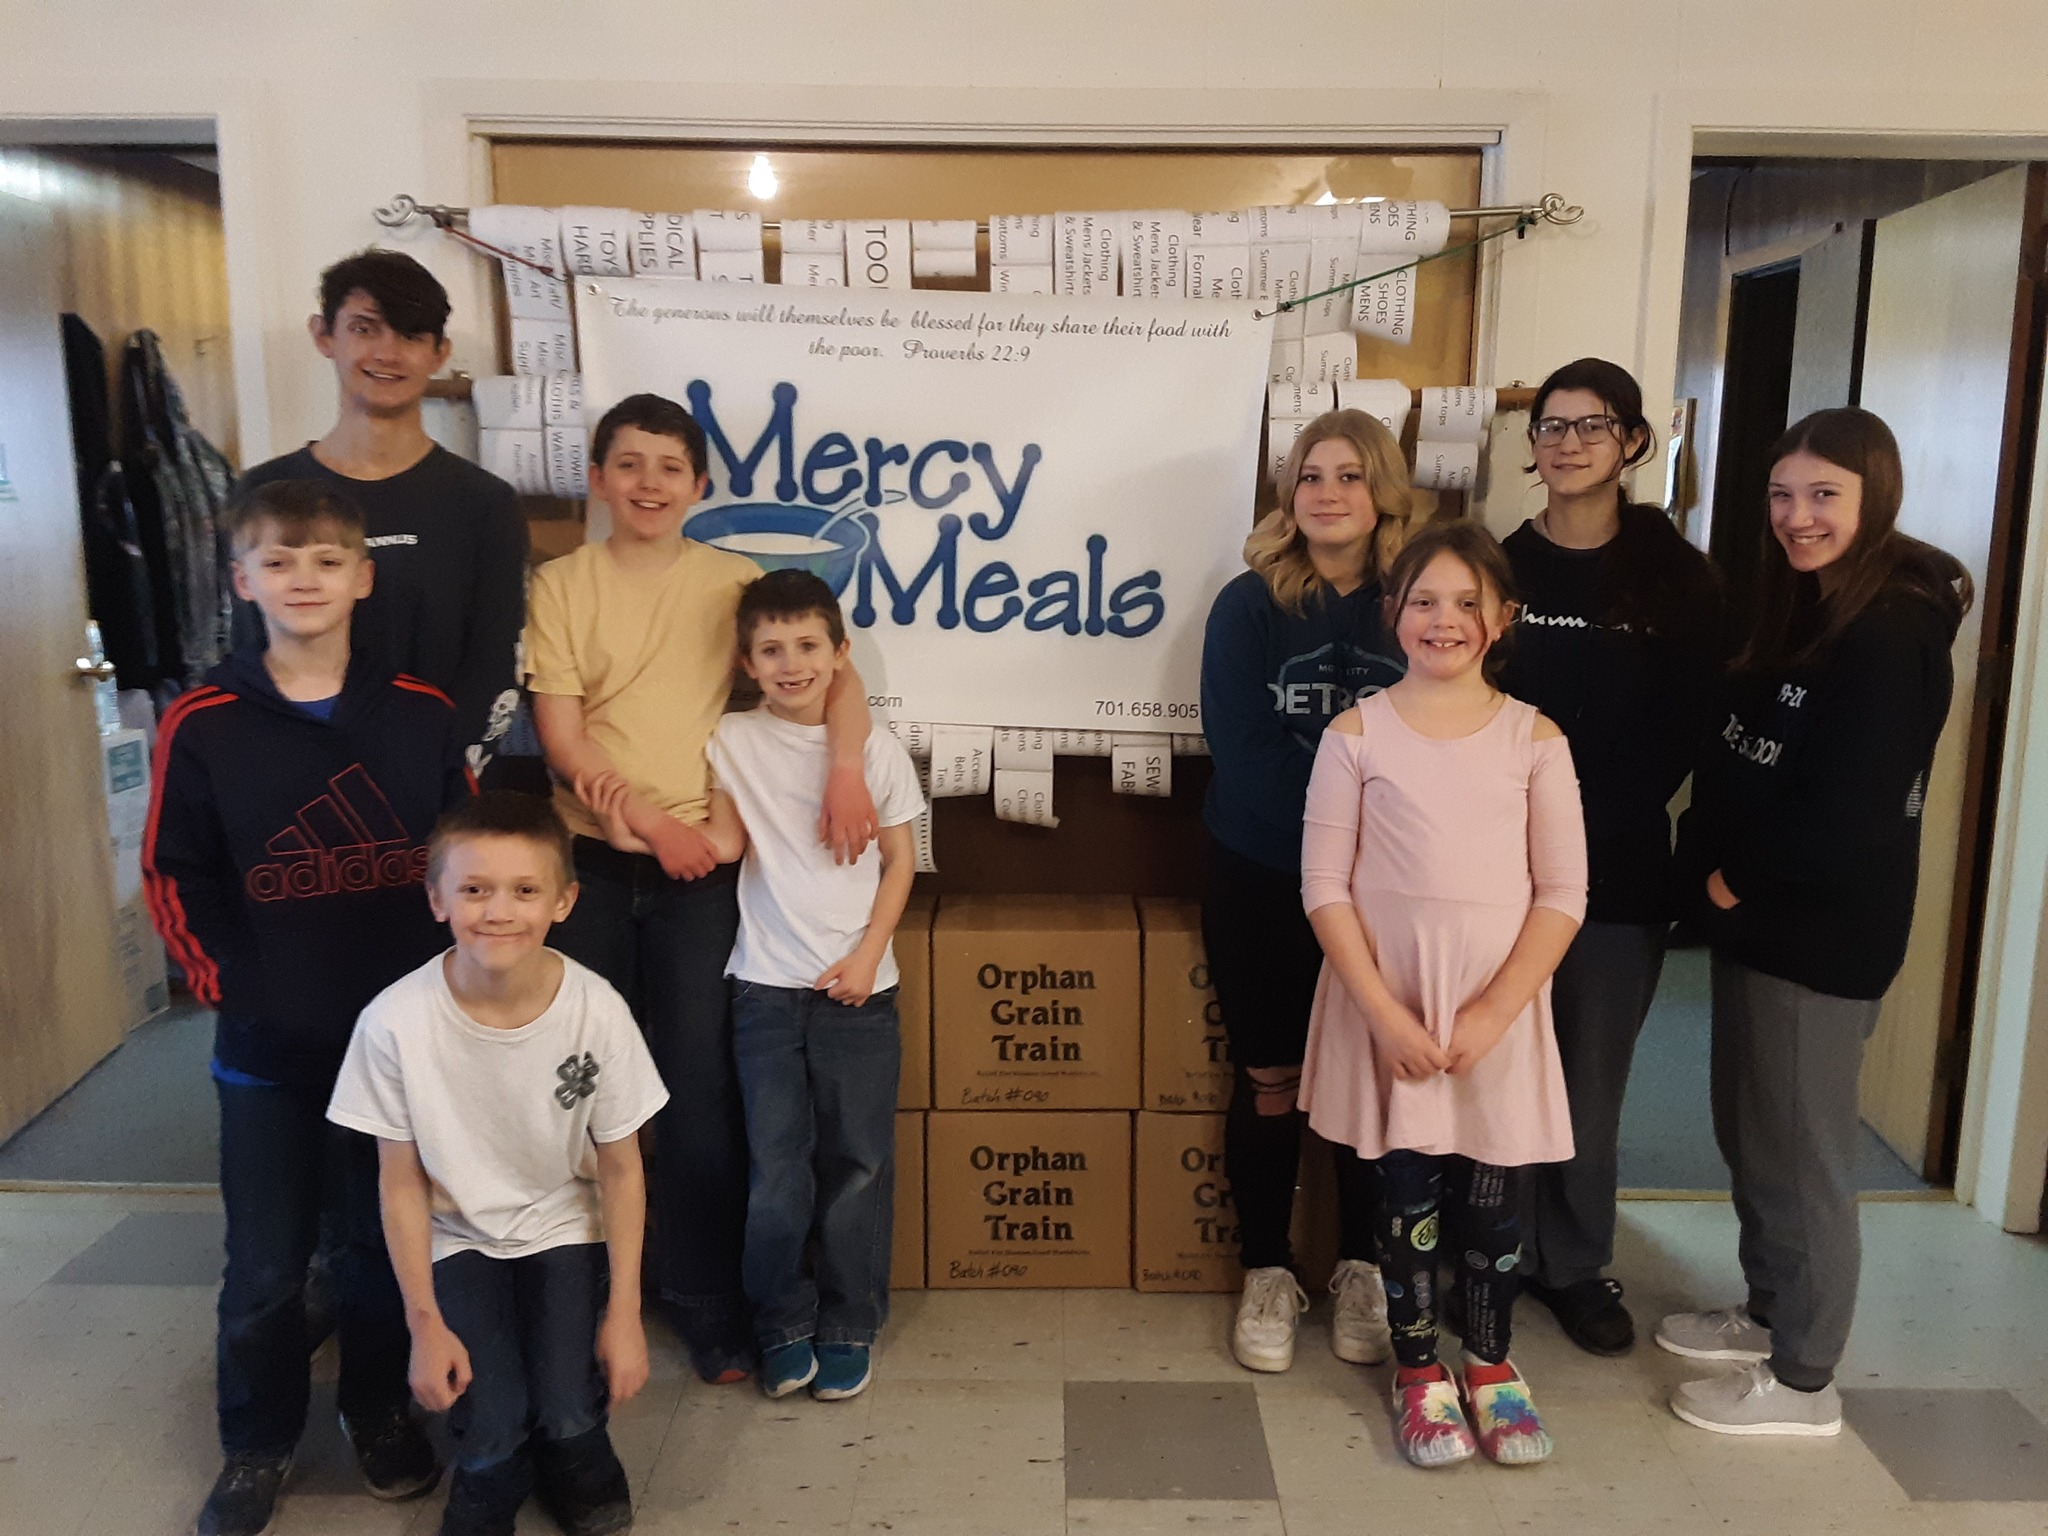 The Moon Lake 4-H club packaged over 2,000 meals with Mercy Meals to help feed the hungry in the U.S. and around the world. (NDSU photo)